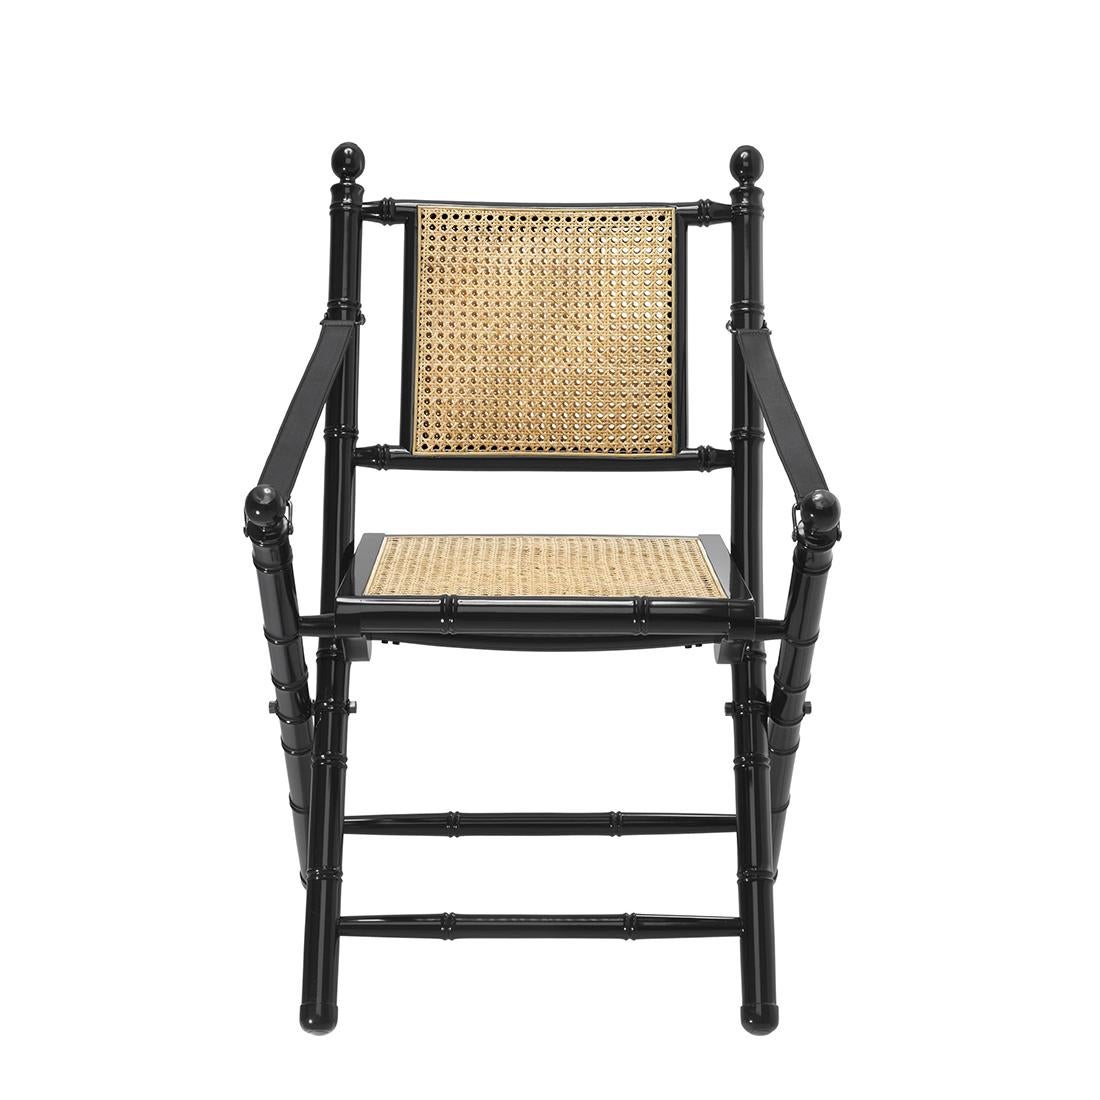 Folding chair bamboo lacquered with structure
in solid mahogany wood in black lacquered finish.
Seat and back in natural rattan. With black leather
armrest and with details in solid brass and nickel.
Also available in brown finish with structure